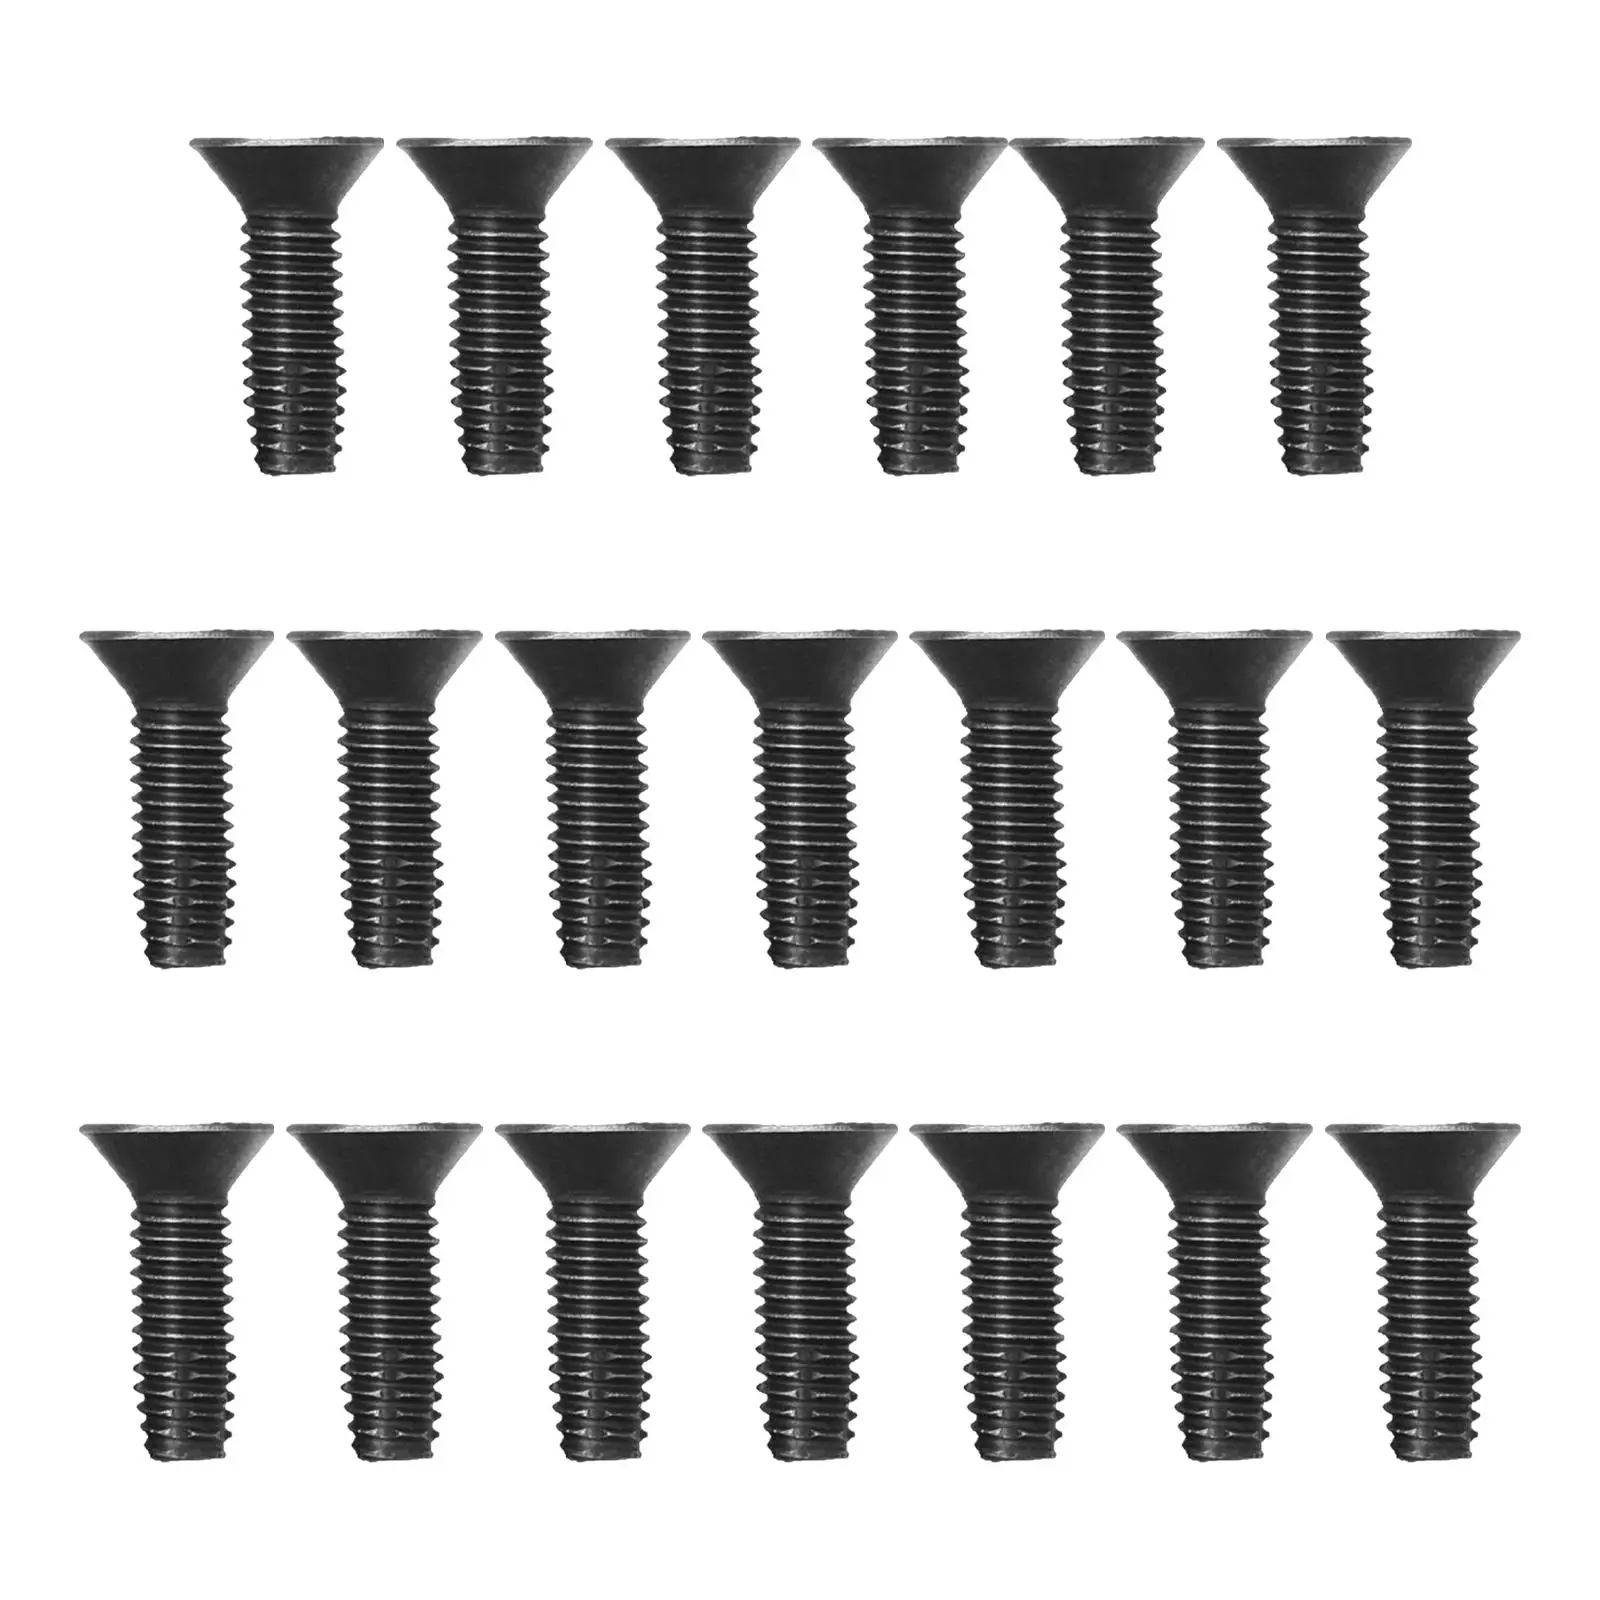 20 Pieces Hinge Screws Bolts Car Supplies Vehicle Parts Iron Tailgate Screws for Wranglers Yj TJ Car Doors Soft Top